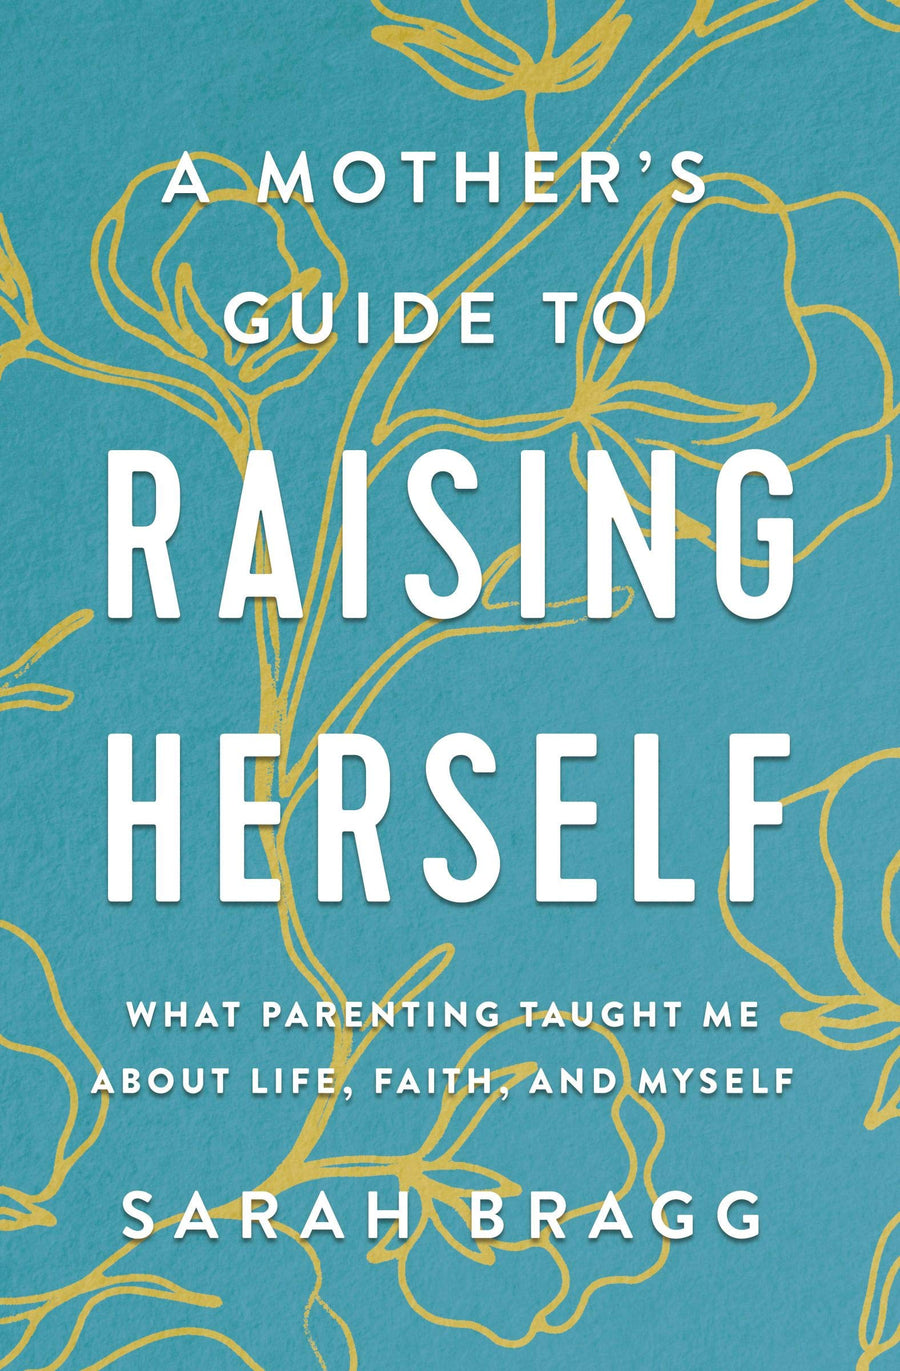 A Mother’s Guide to Raising Herself by Sara Bragg